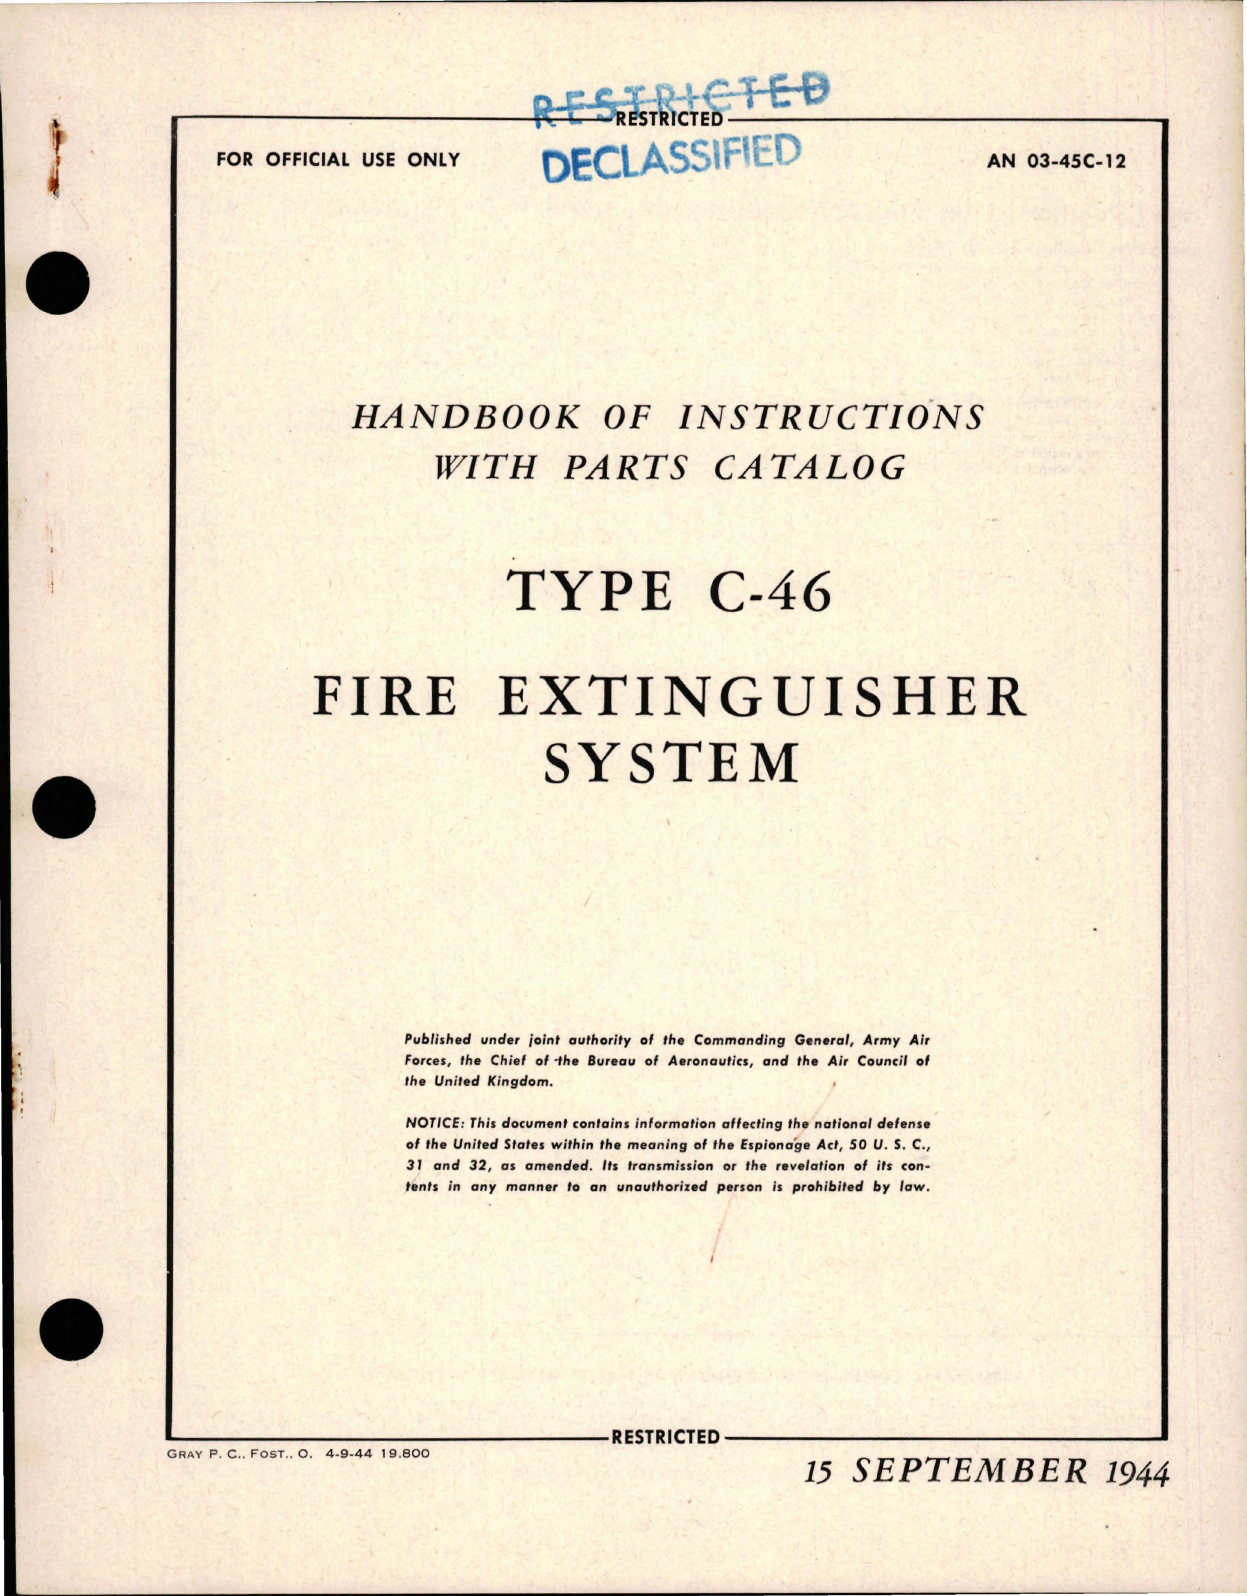 Sample page 1 from AirCorps Library document: Instructions with Parts Catalog for Type C-46 Fire Extinguisher System